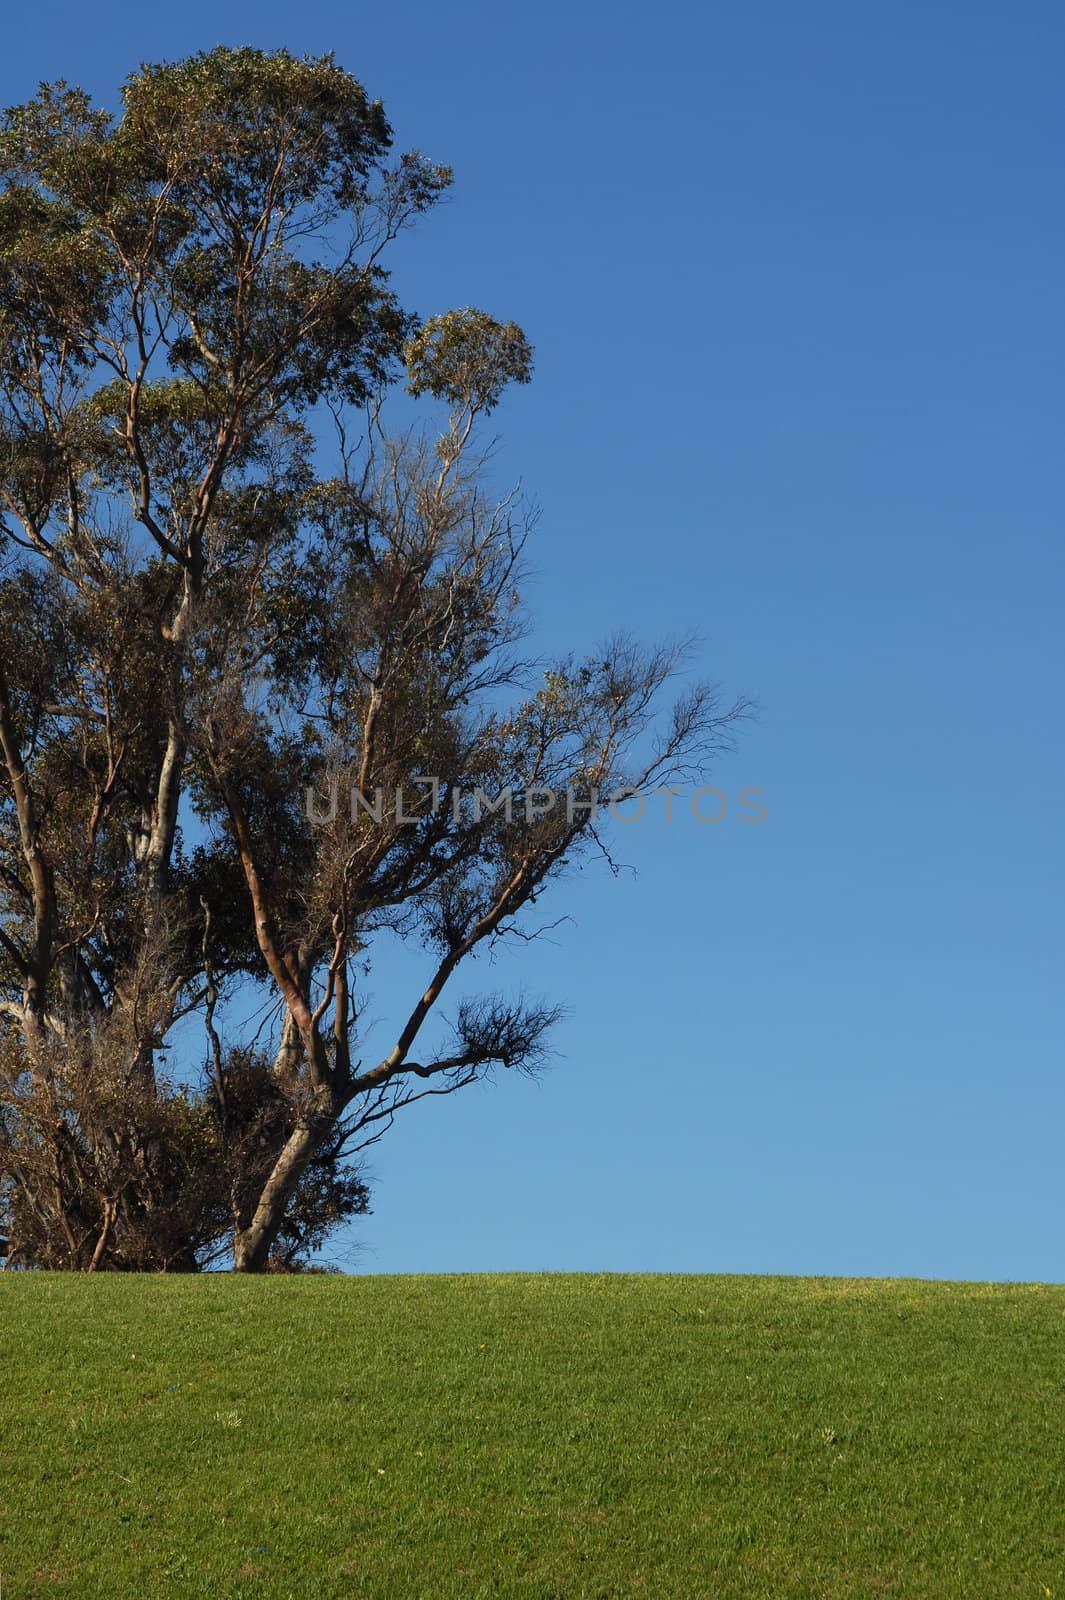 Single tree and green grass on blue sky by cienpies